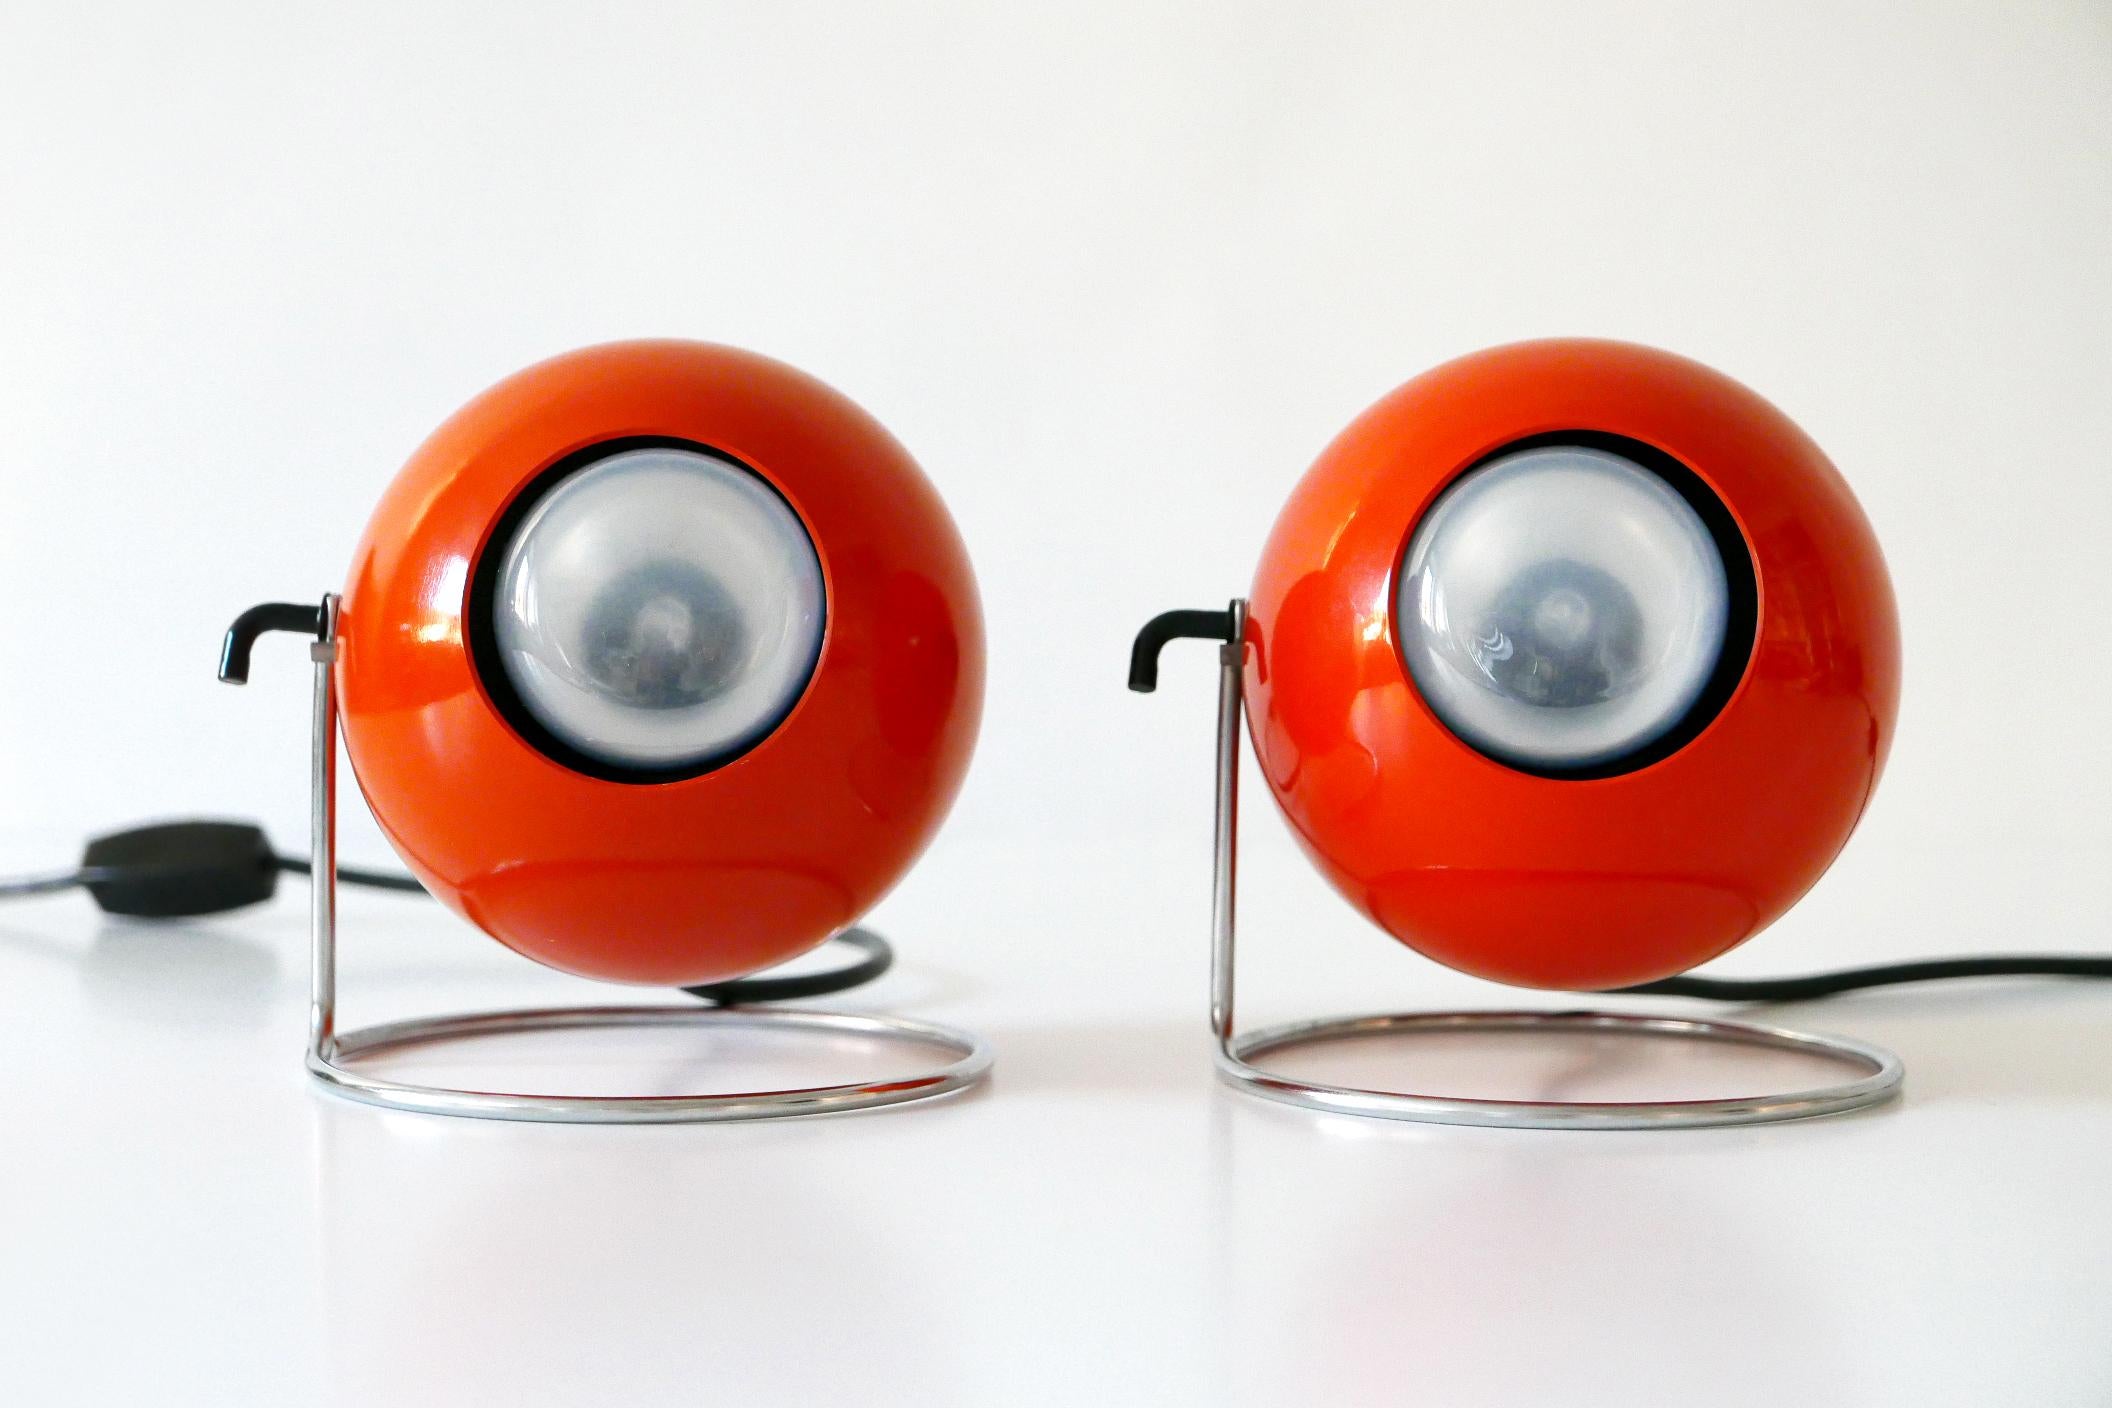 Set of Two Mid-Century Modern Metal 'Eye' Table Lamps, ERCO, 1960s-1970s Germany For Sale 2